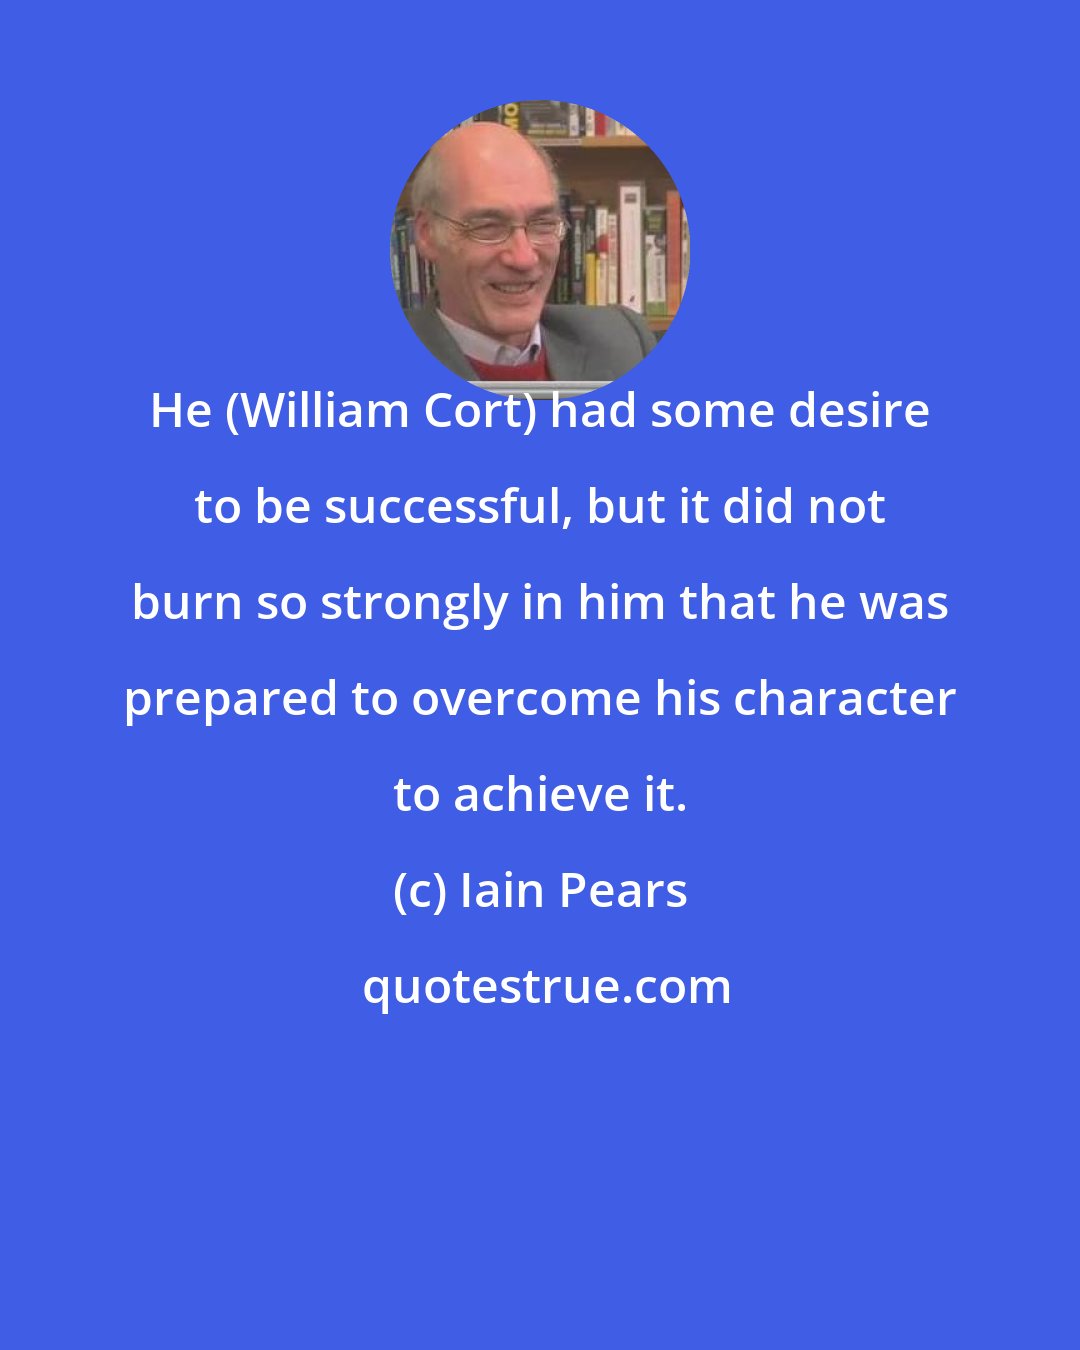 Iain Pears: He (William Cort) had some desire to be successful, but it did not burn so strongly in him that he was prepared to overcome his character to achieve it.